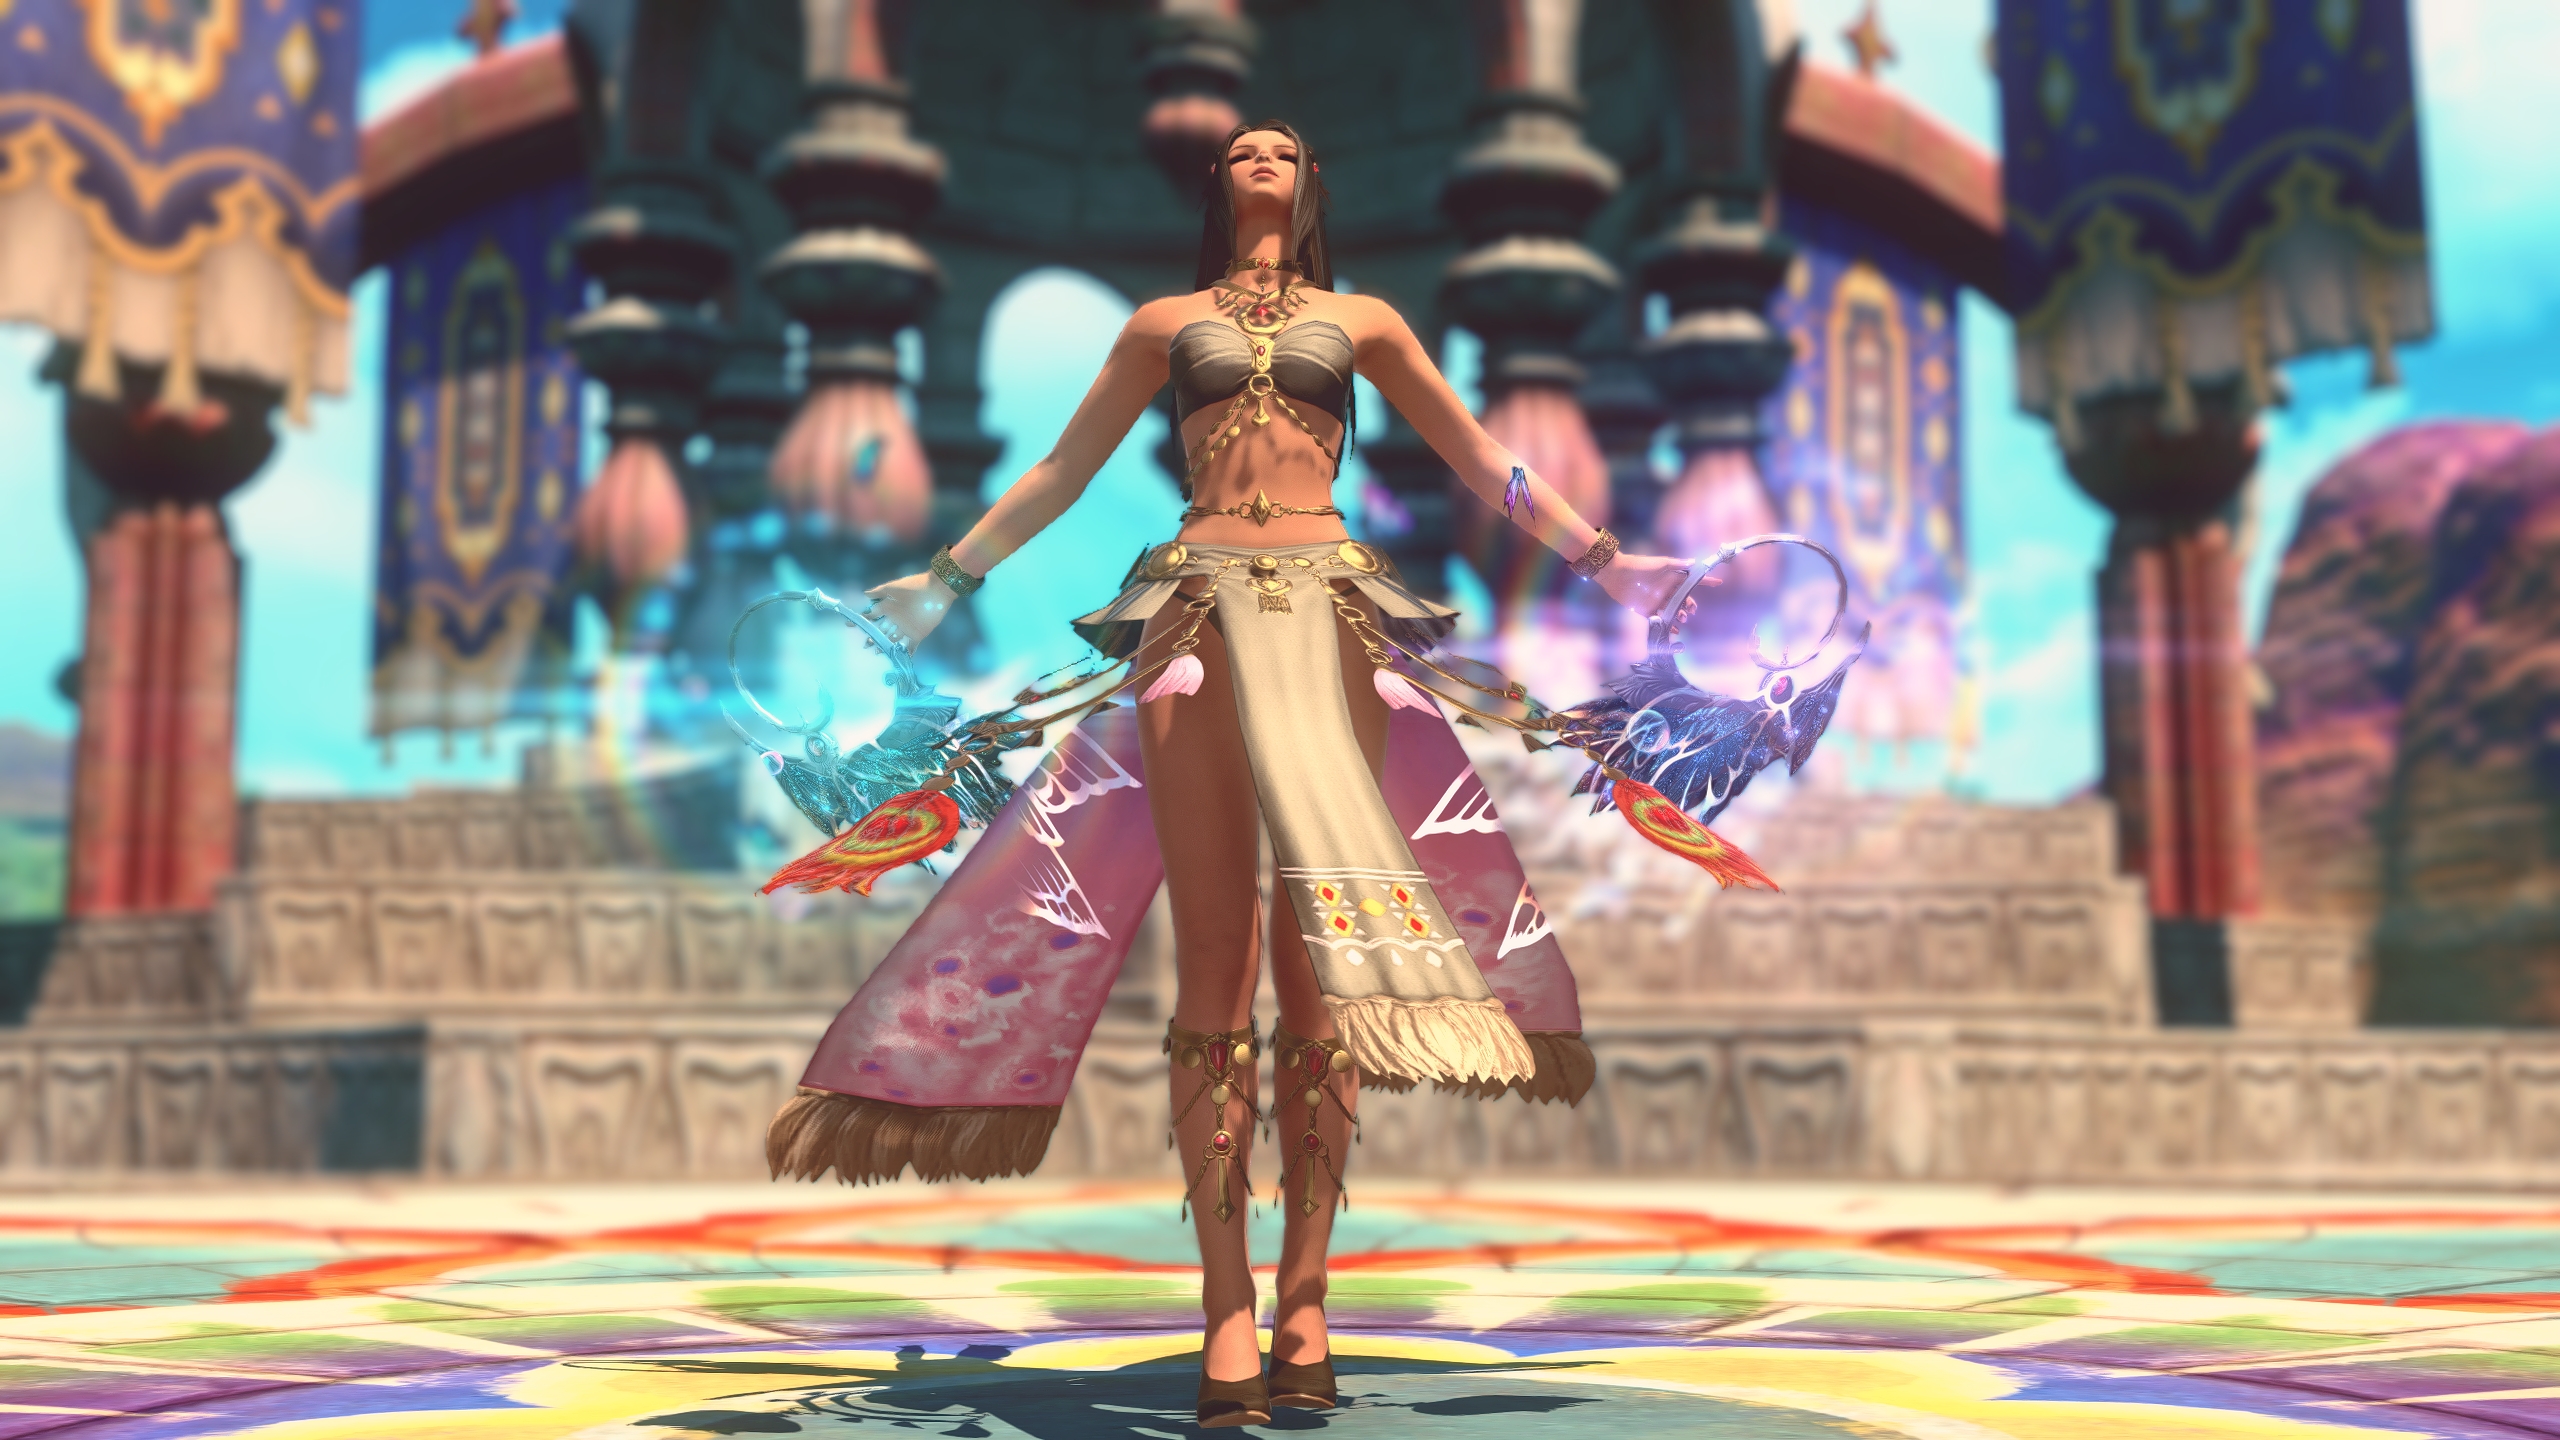 GamerCityNews NtZcifRVTgV32K4rYbJuYJ How much time do you spend on MMO character fashion? 